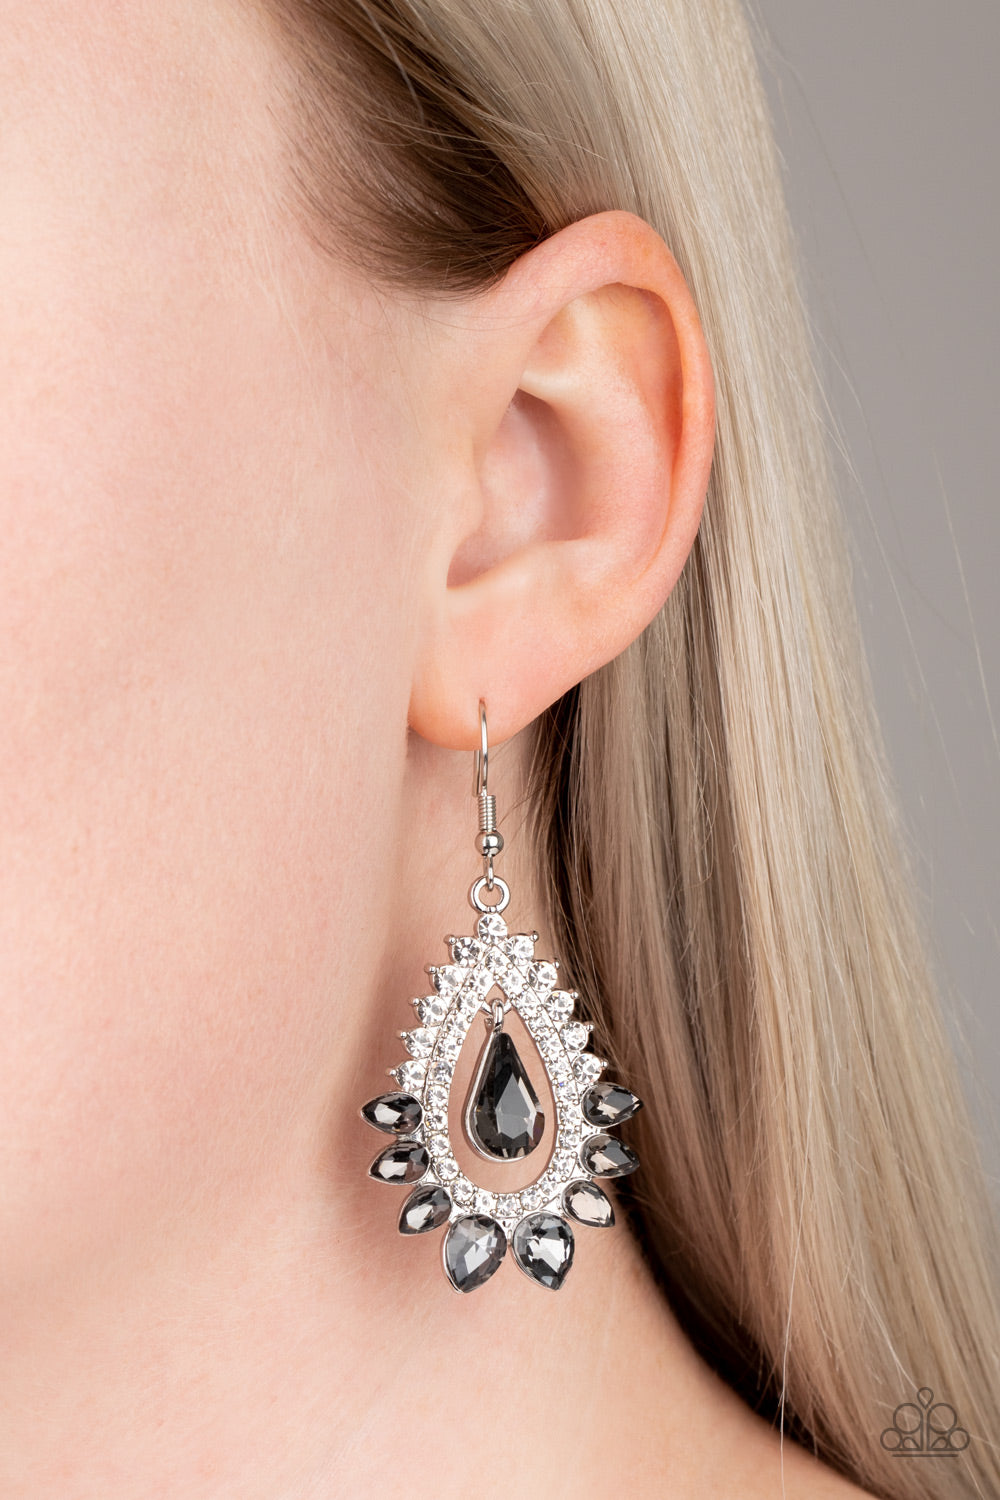 Paparazzi Boss Brilliance Silver Earrings is only $5 and is ready to ship. Great as gifts